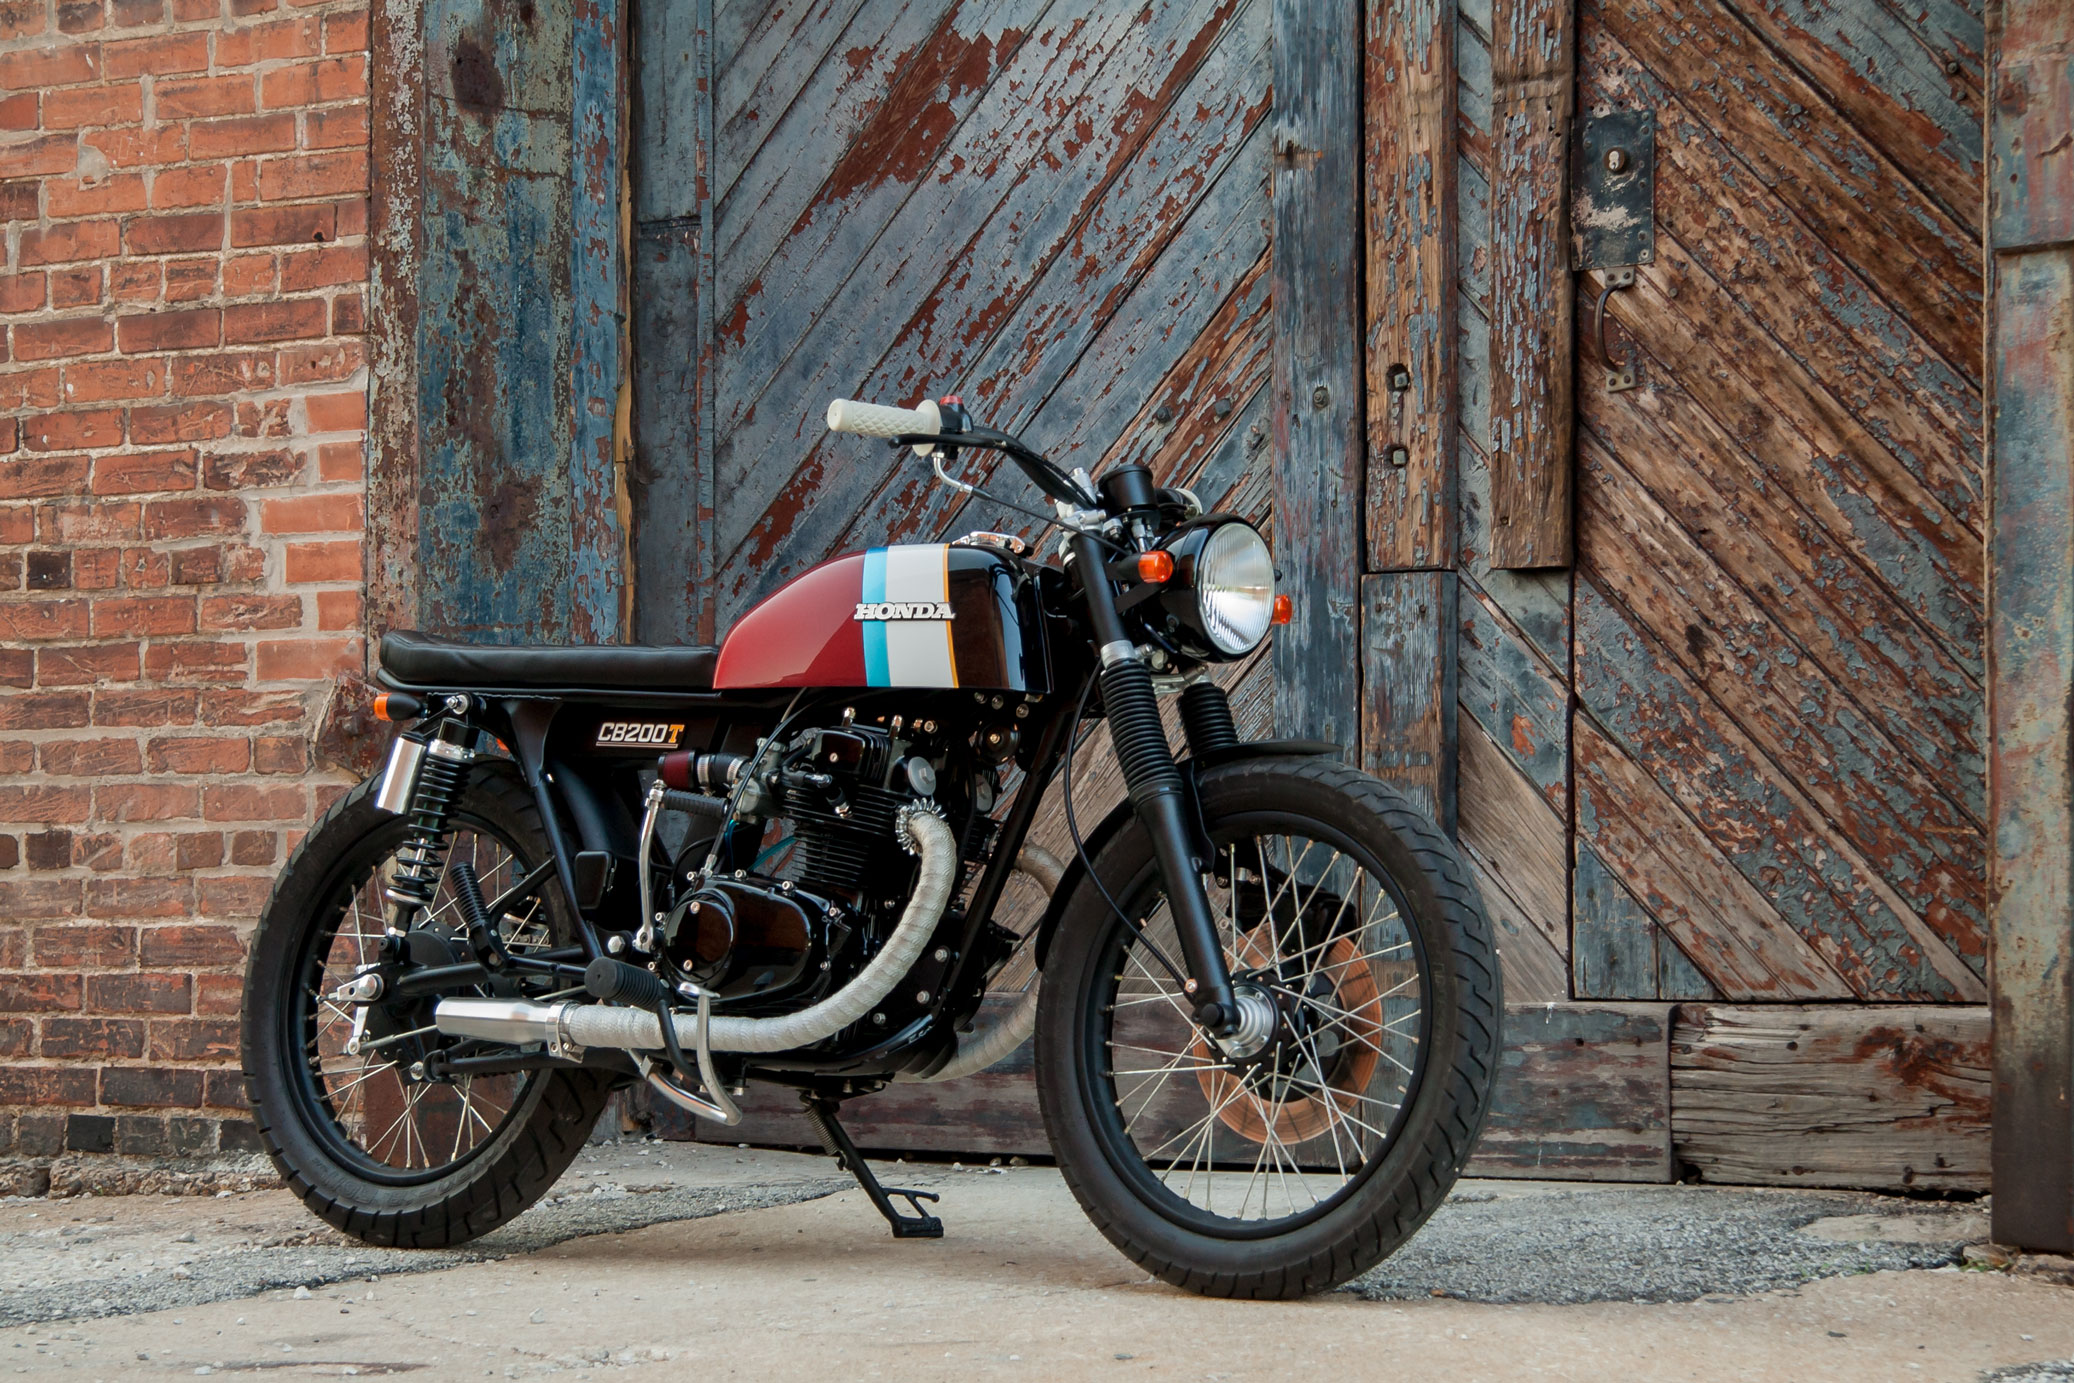  Custom-Built 1975 Honda CB200T Is What Perfection on Two Wheels Looks Like 